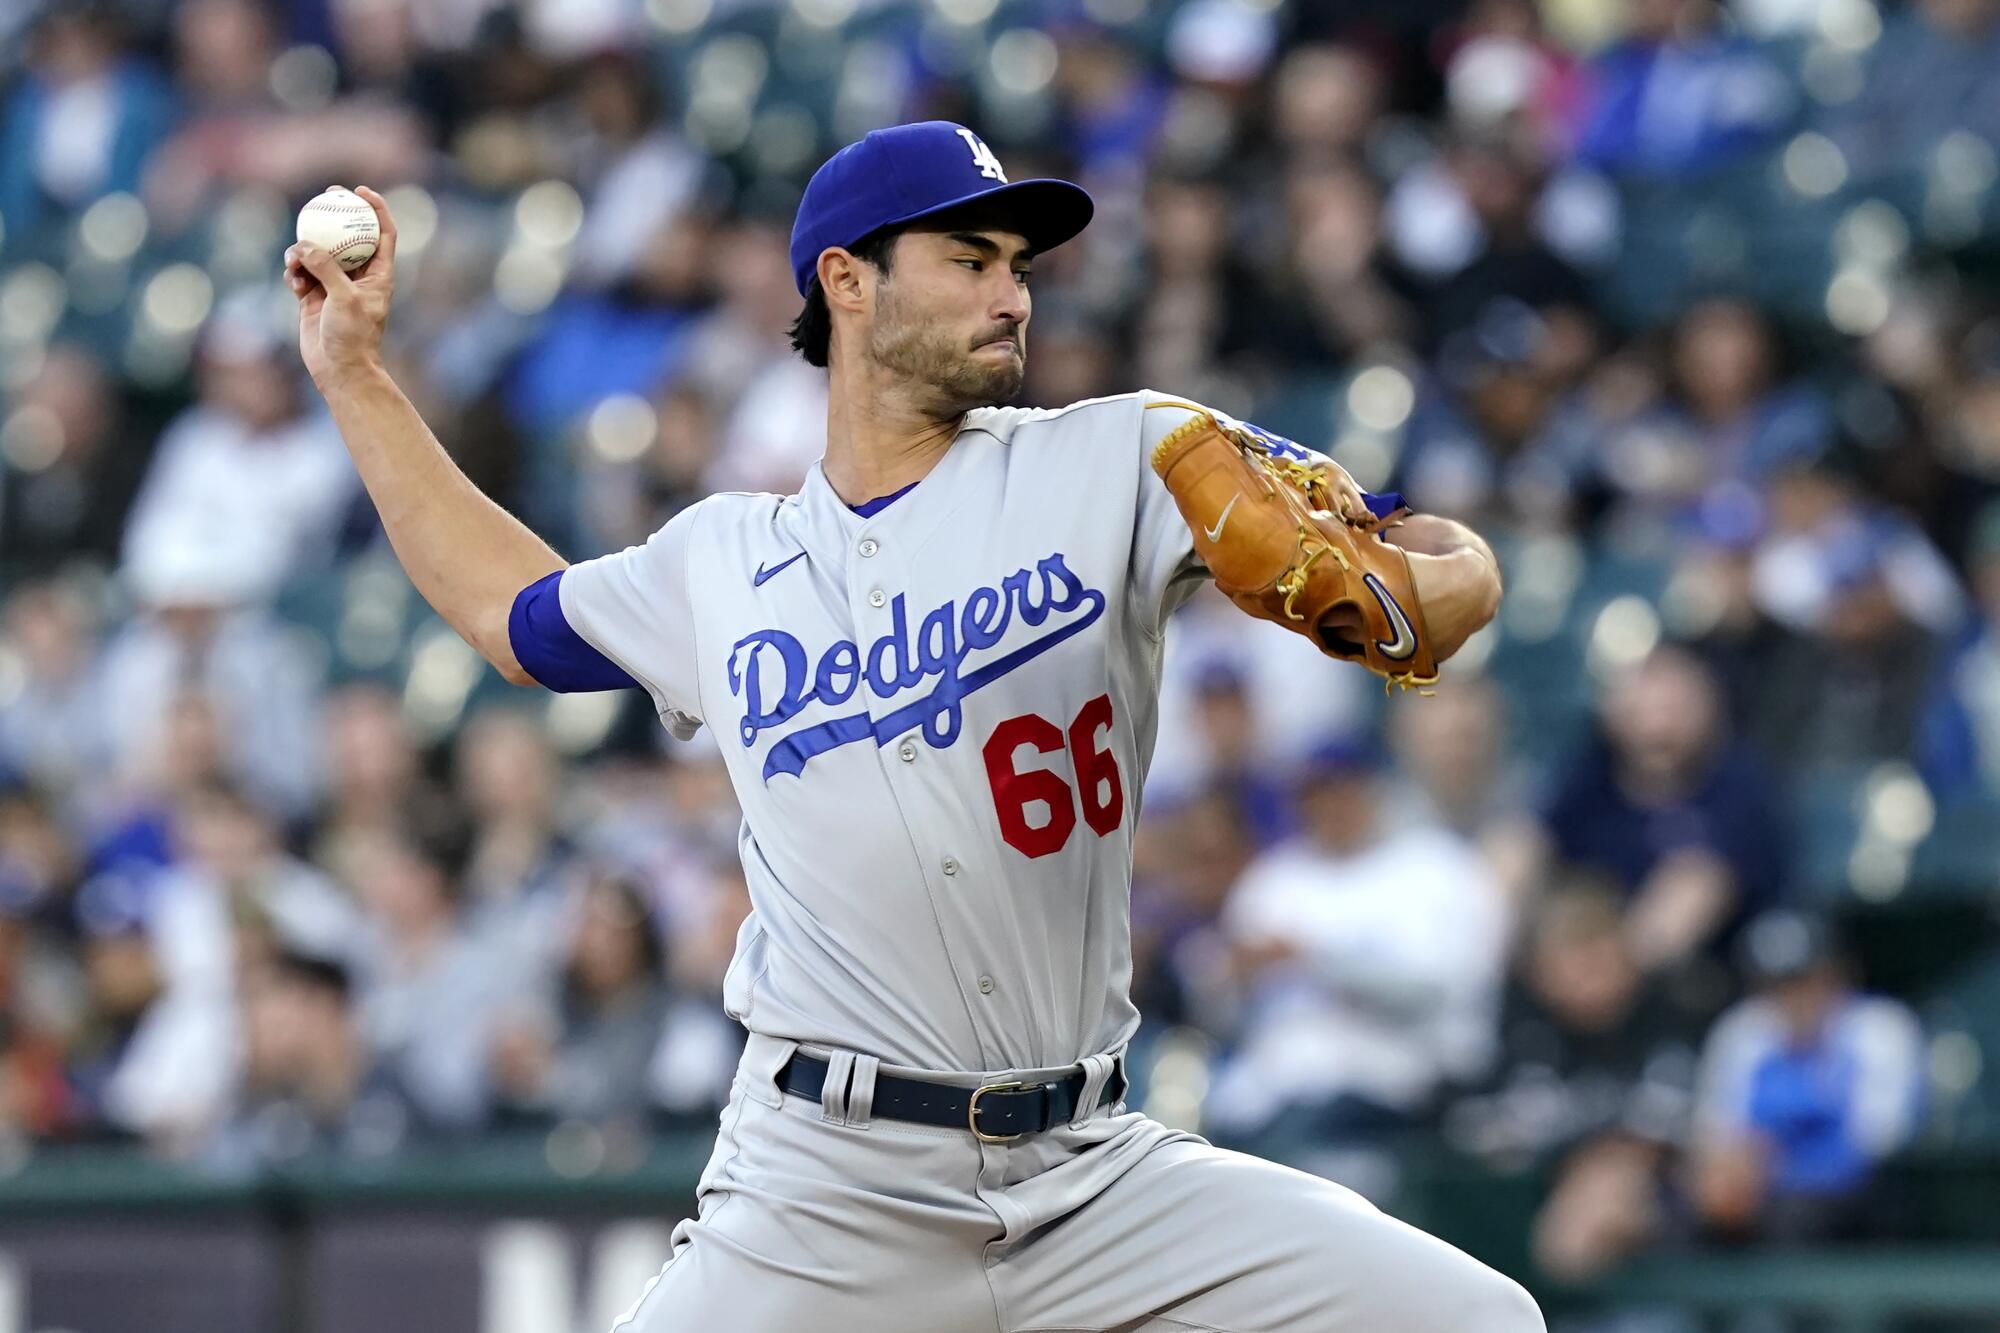 Dodgers starting pitcher Mitch White delivers against the Chicago White Sox on June 7.